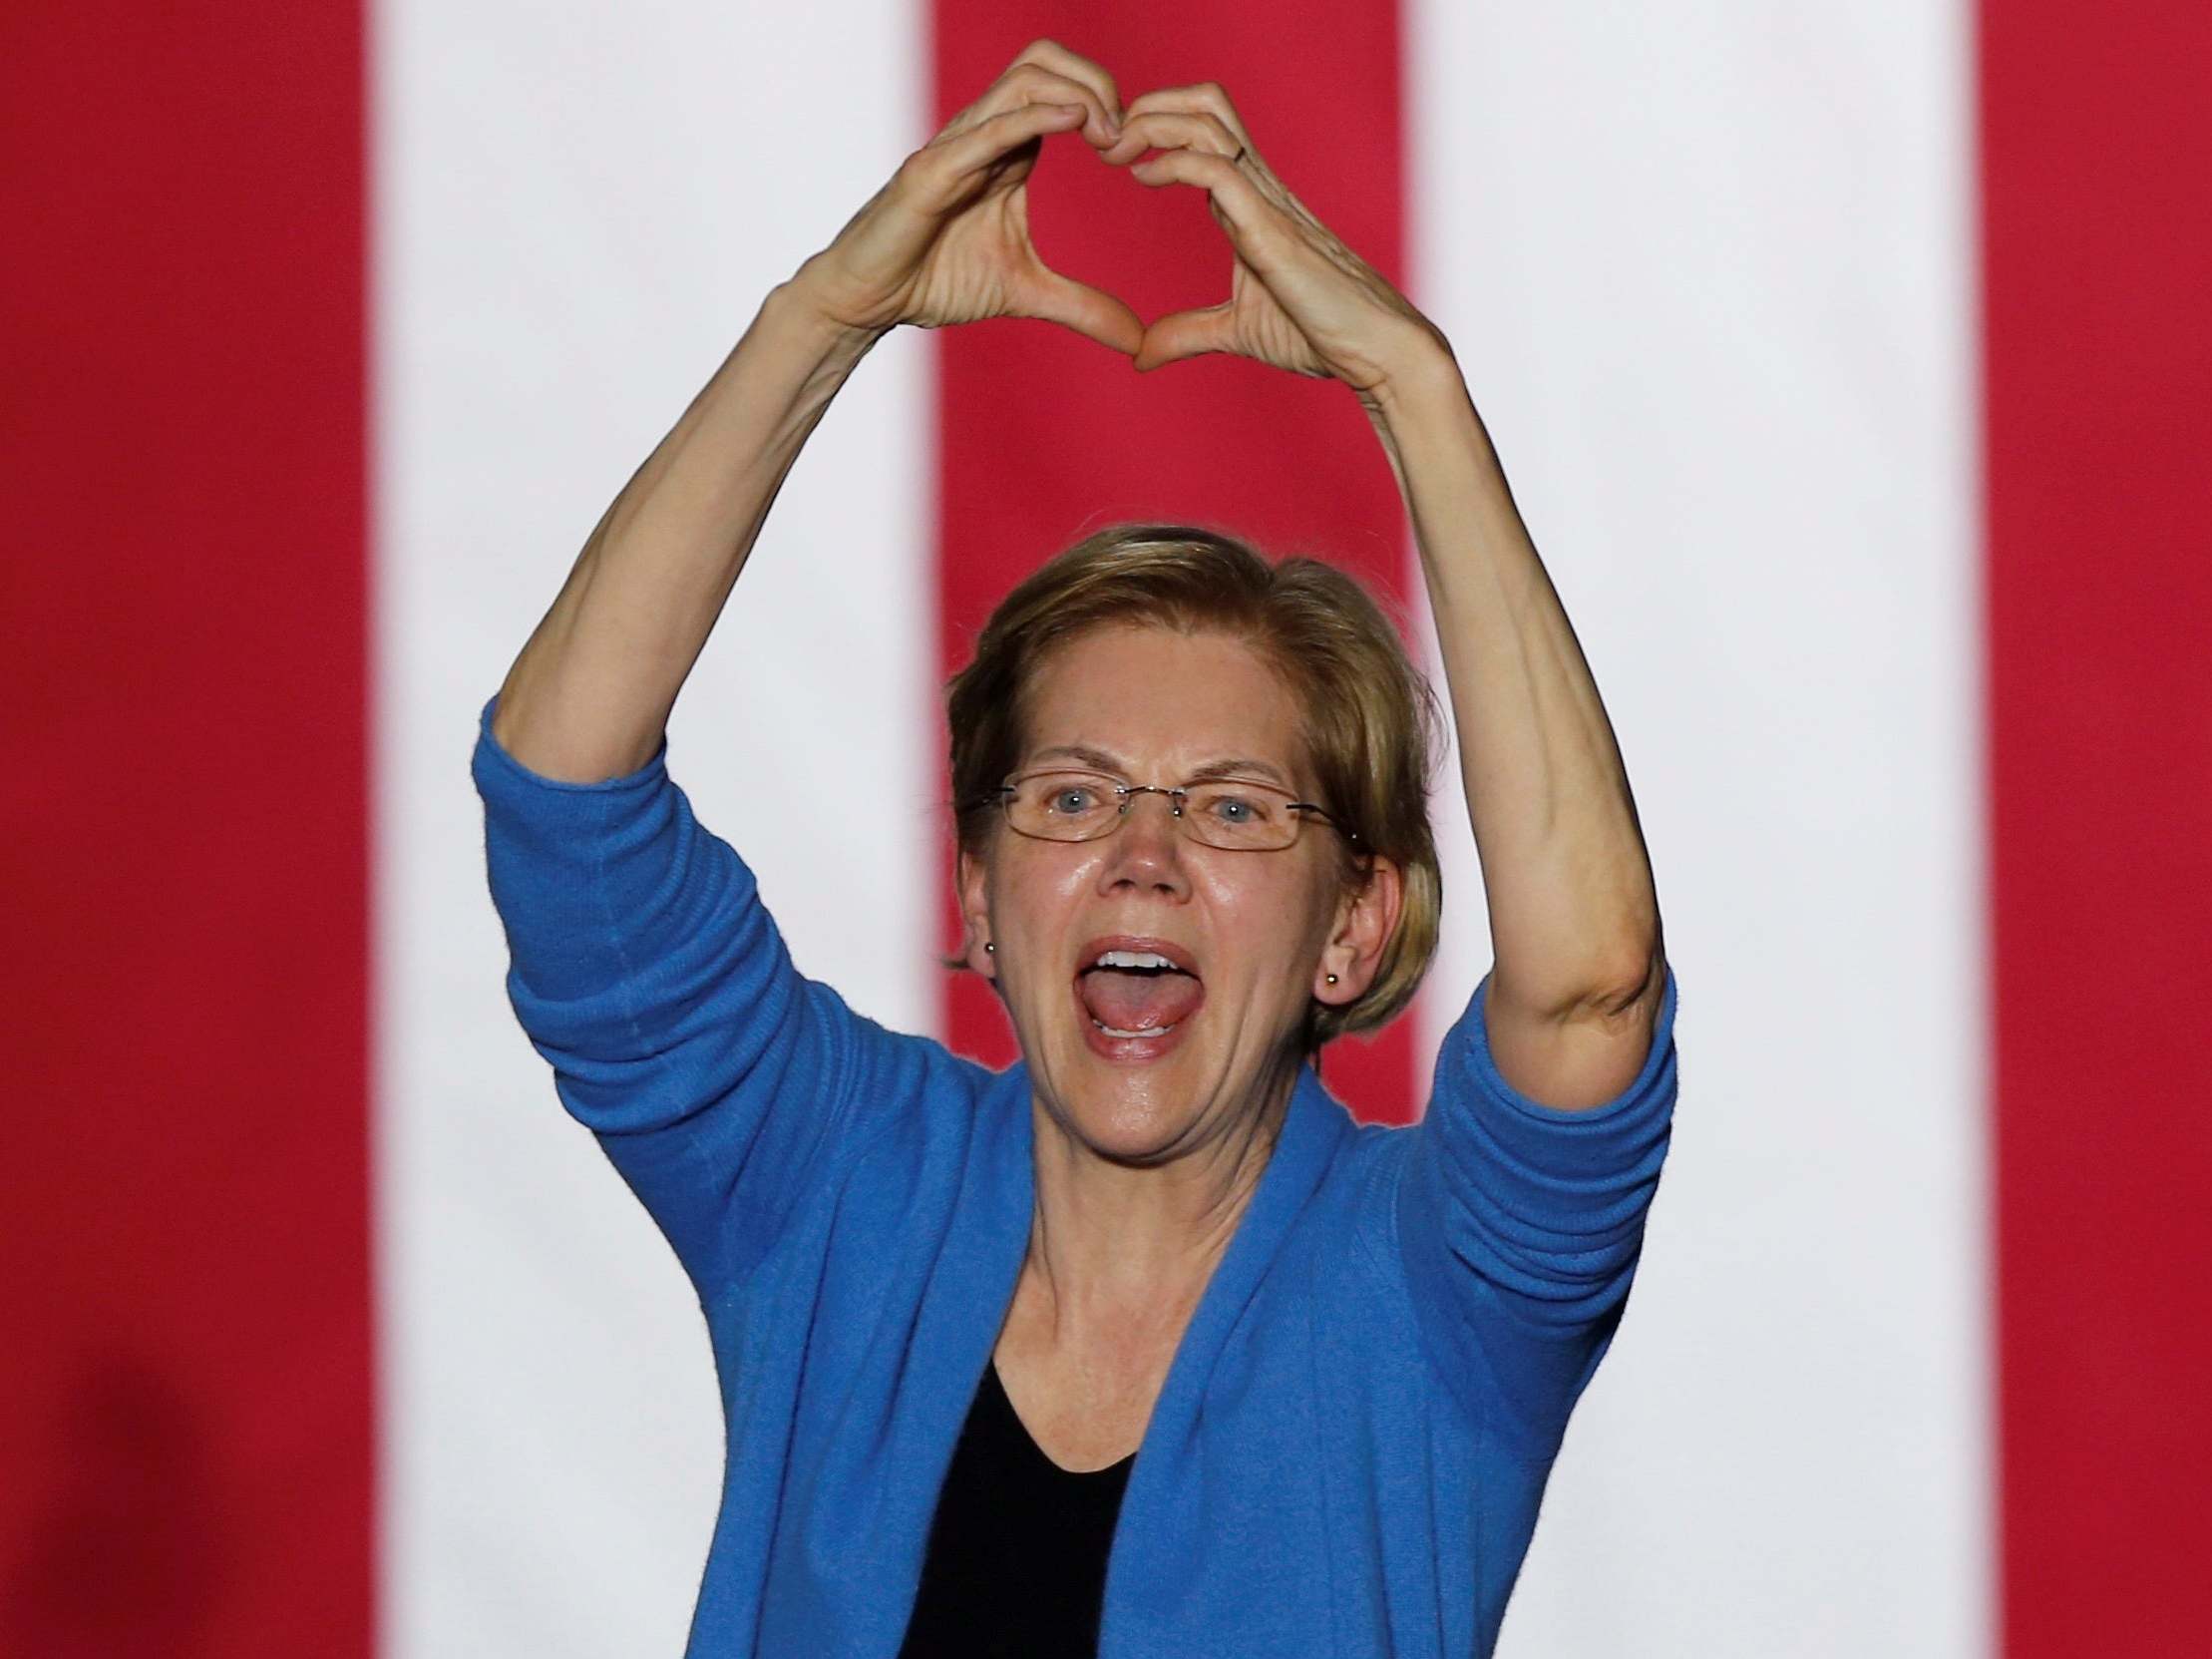 Warren addresses supporters at a Detroit rally on Tuesday